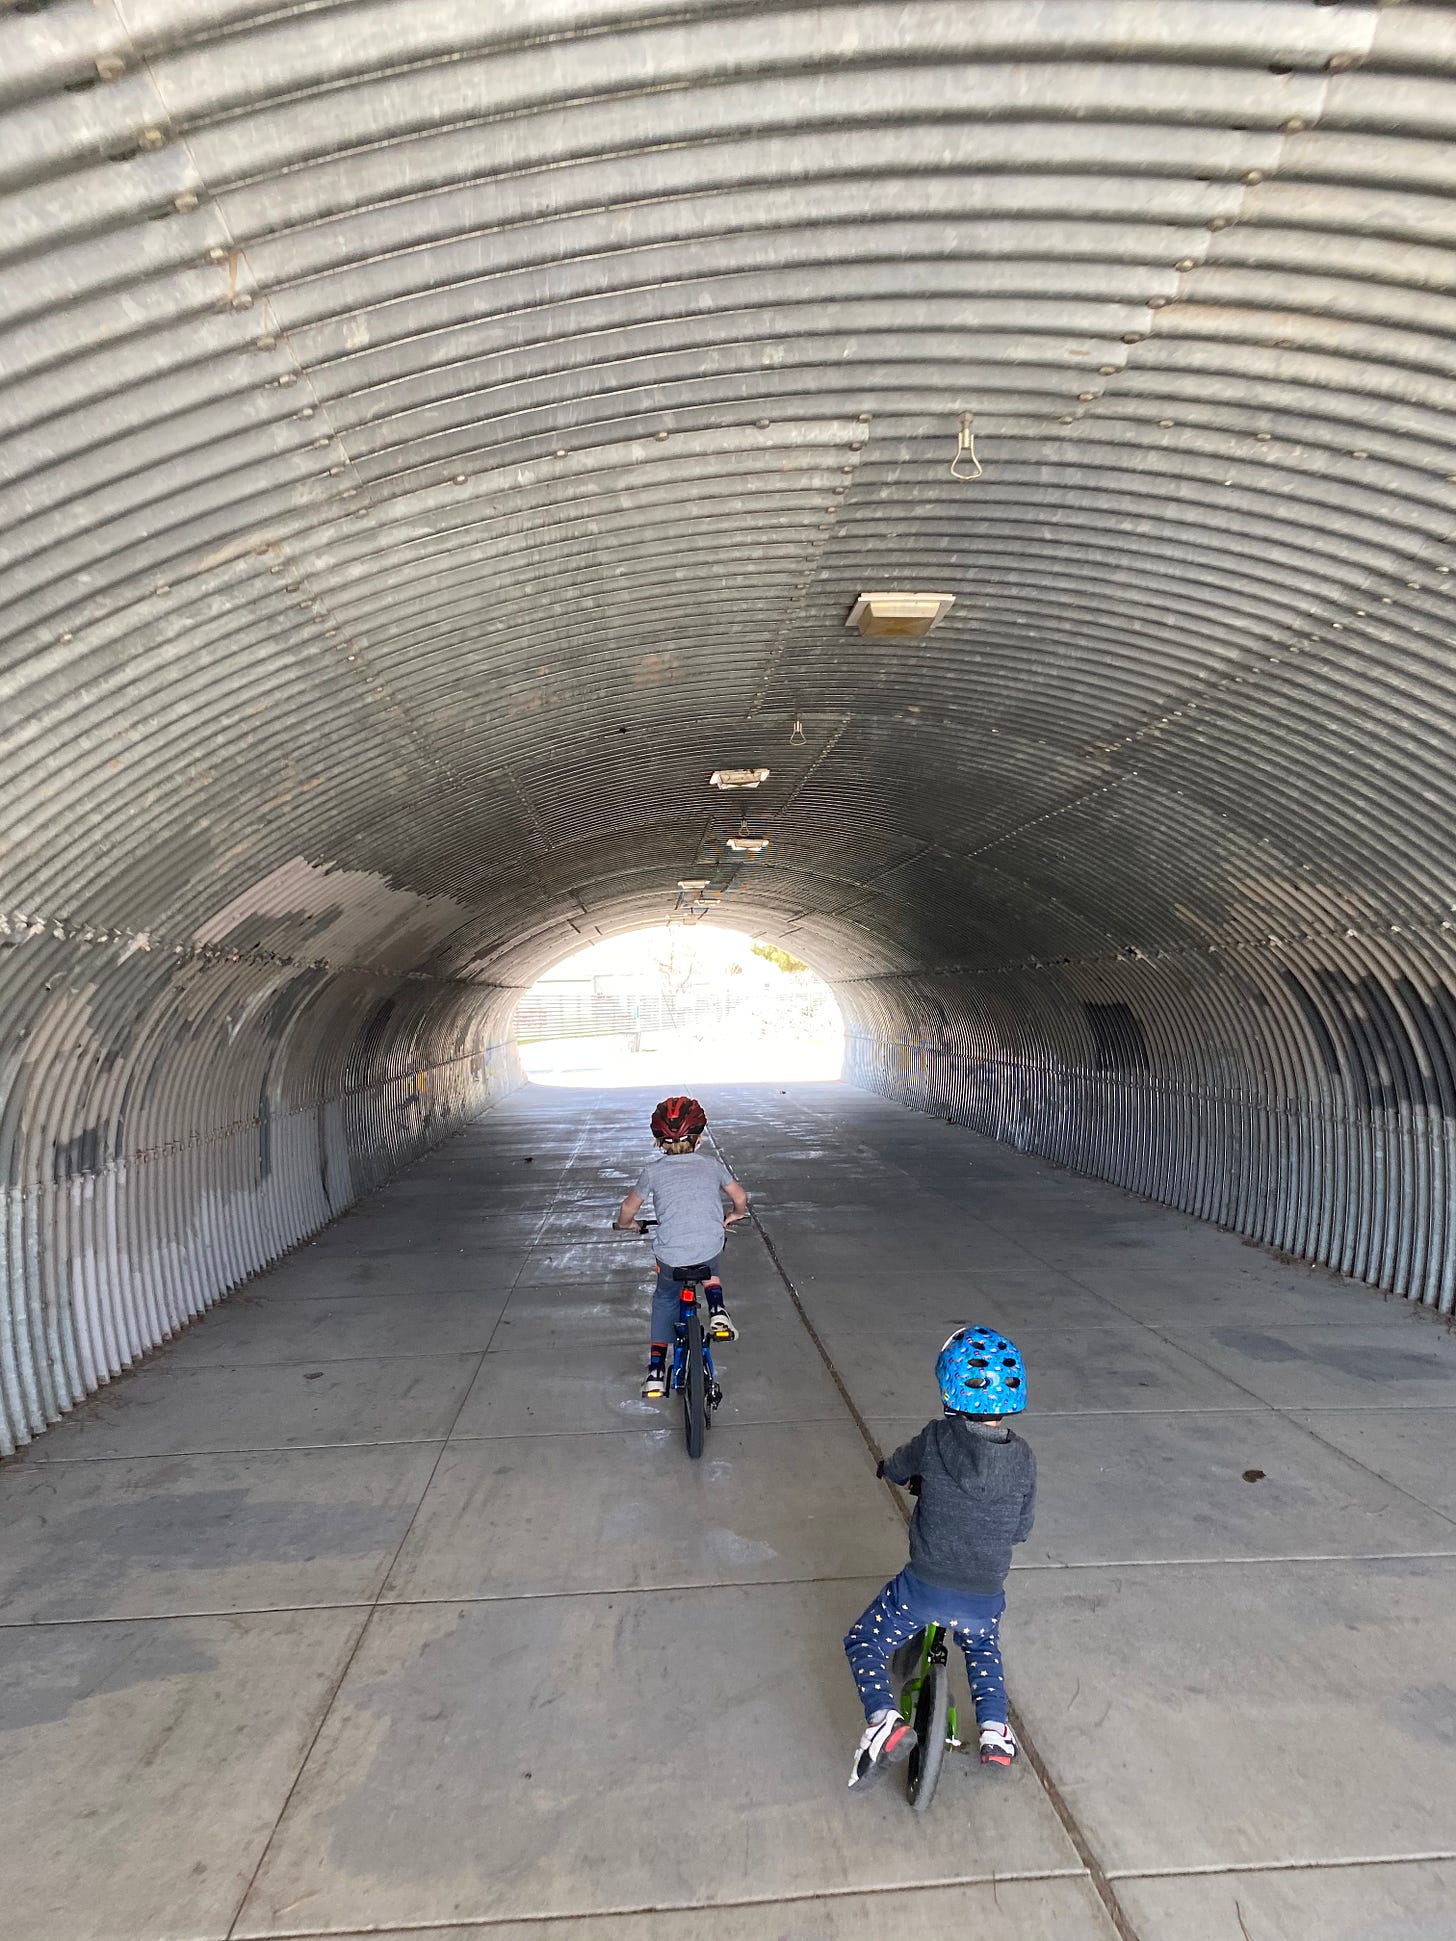 My two kids (one smaller than the other), riding their bikes through a corrugated metal tunnel, towards the sunlight